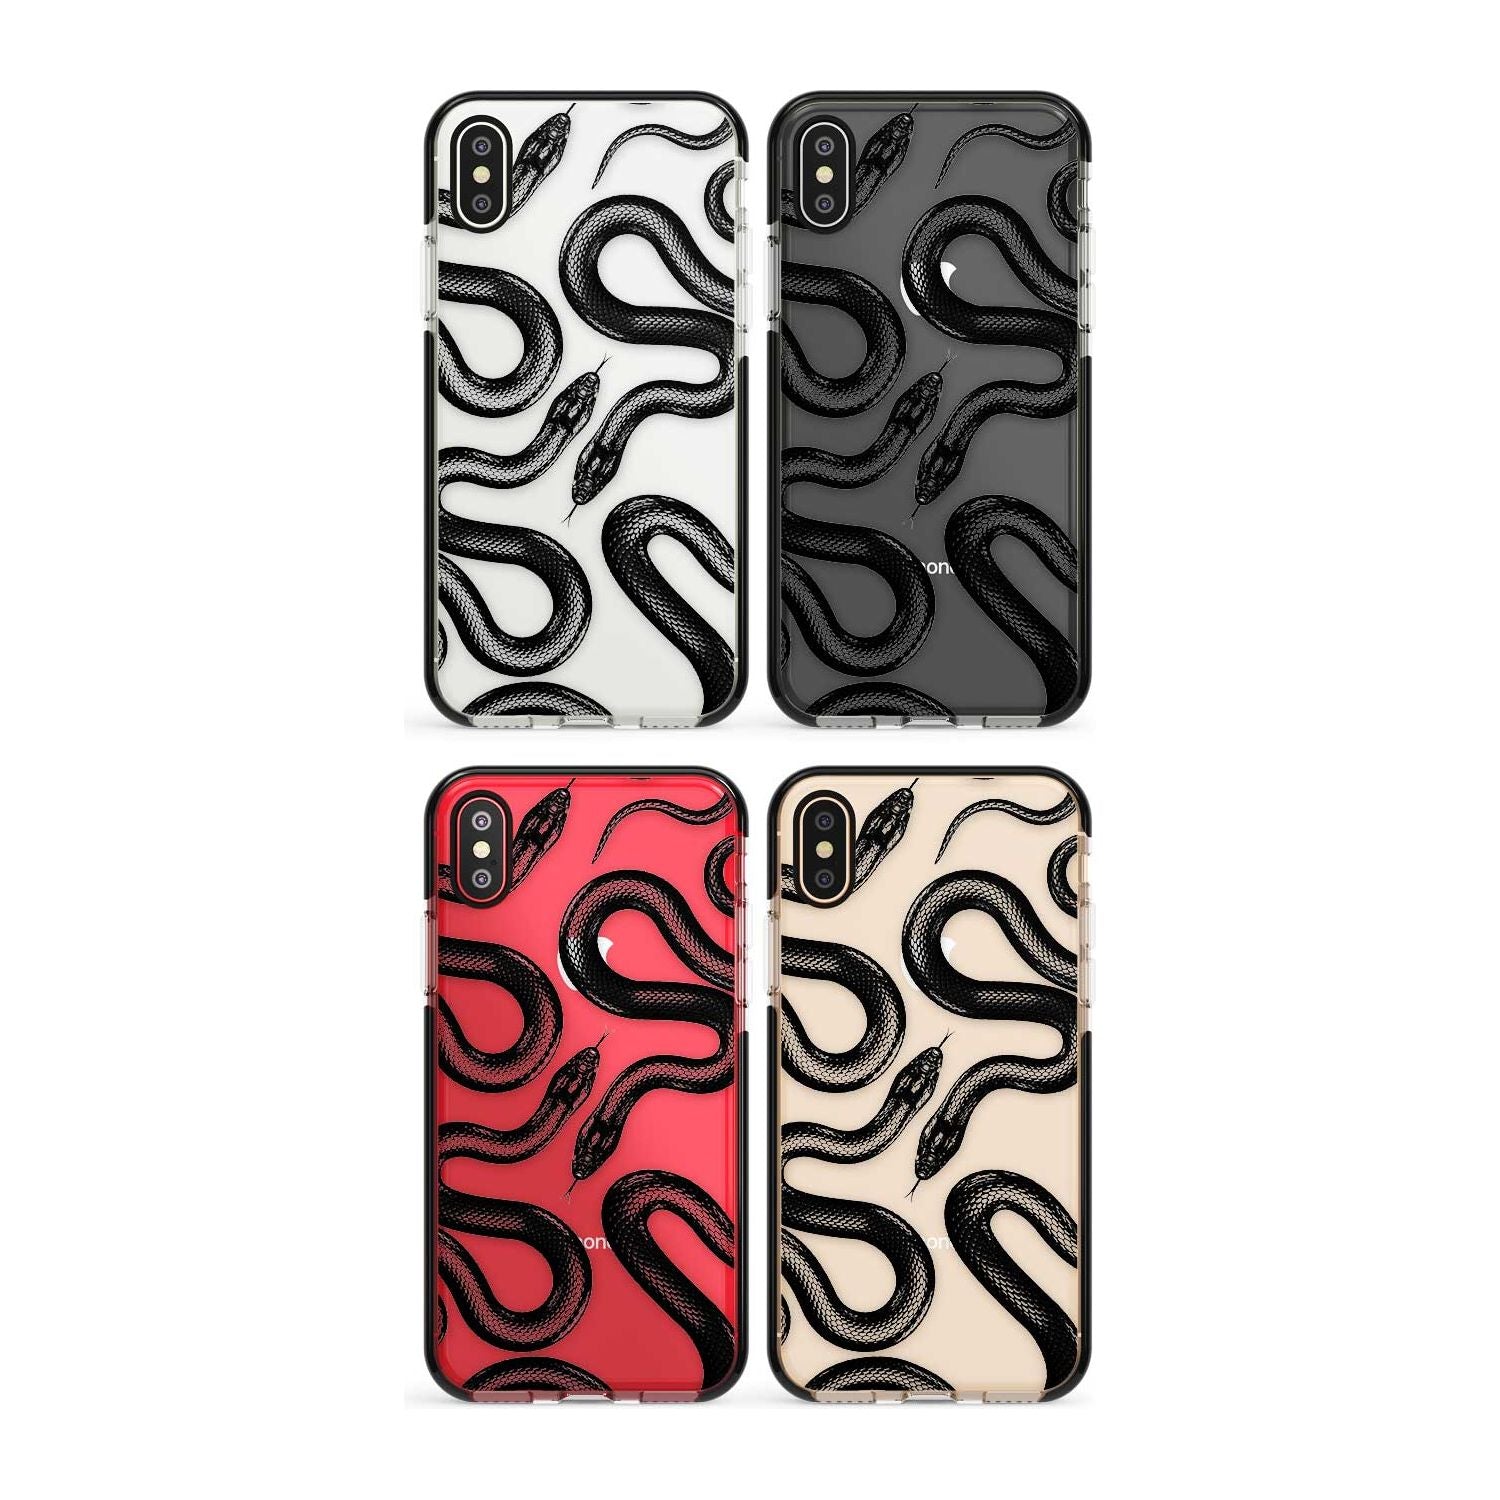 Snakes Phone Case for iPhone X XS Max XR